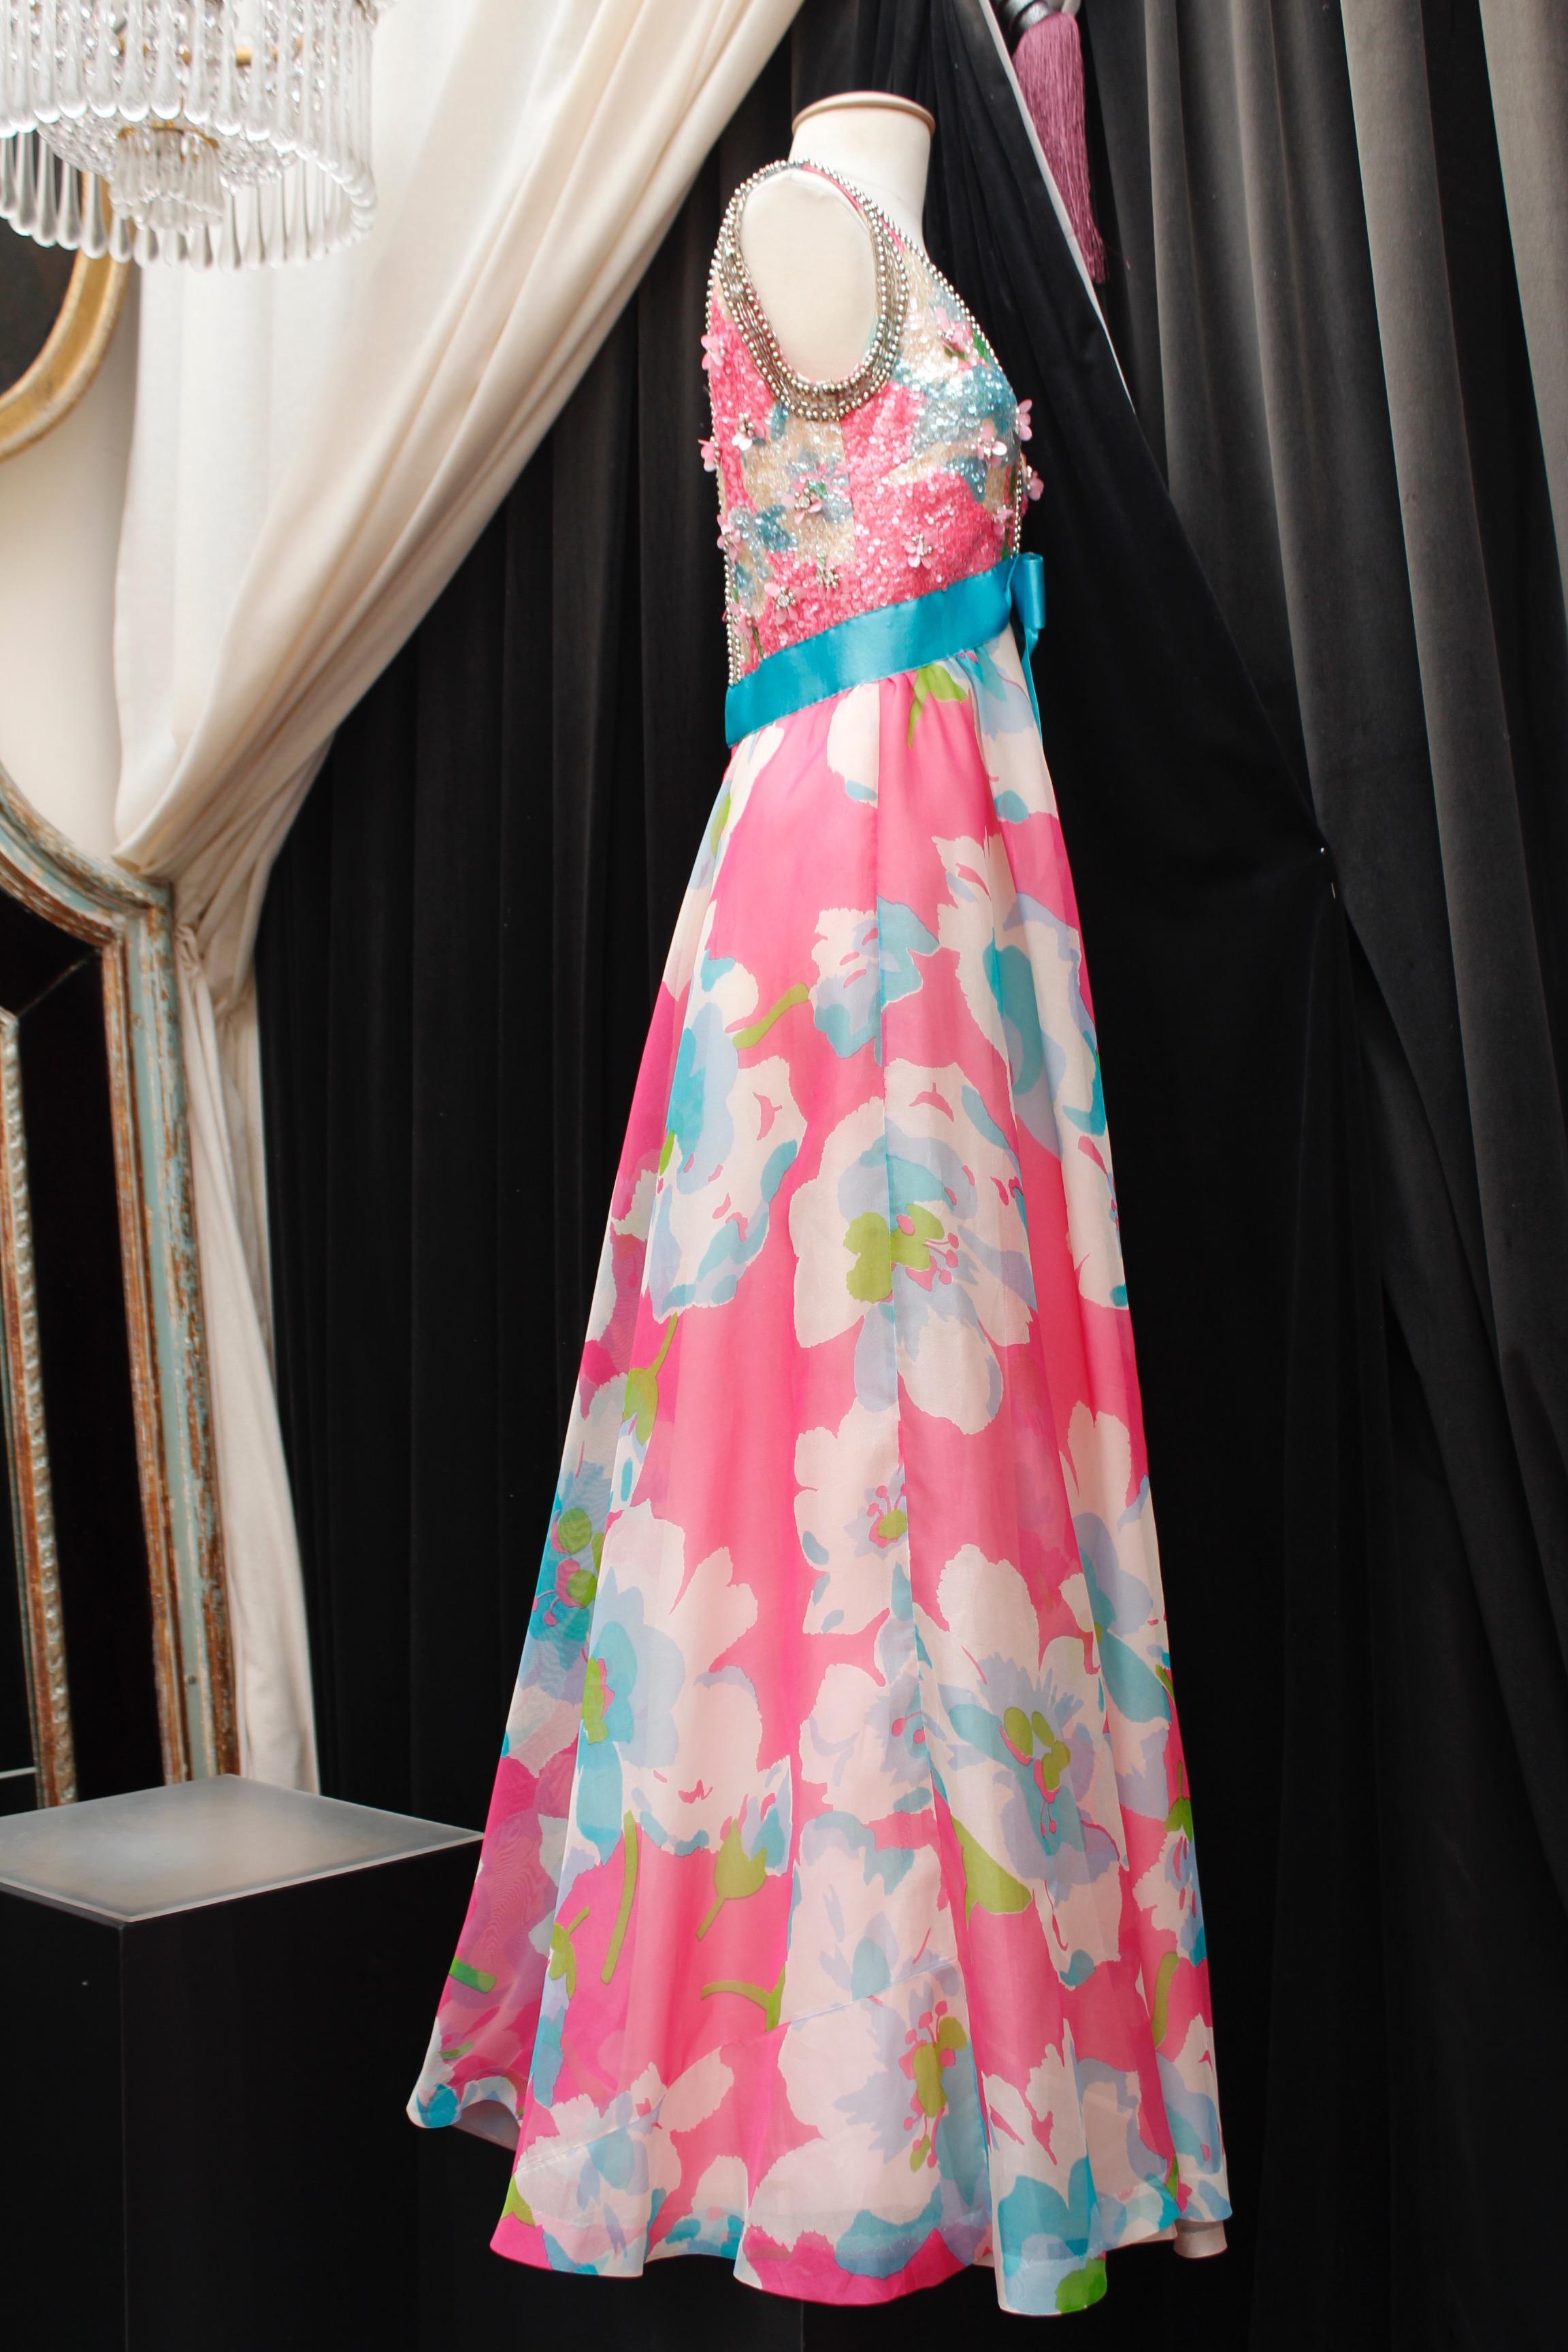 JEAN PATOU BOUTIQUE – Lovely sleeveless dress, composed of silk taffeta with floral pattern in pink, white, green and blue colors. It features a V-neck, a belt with a turquoise bow, and a bust entirely embroidered with sequins and beads in matching